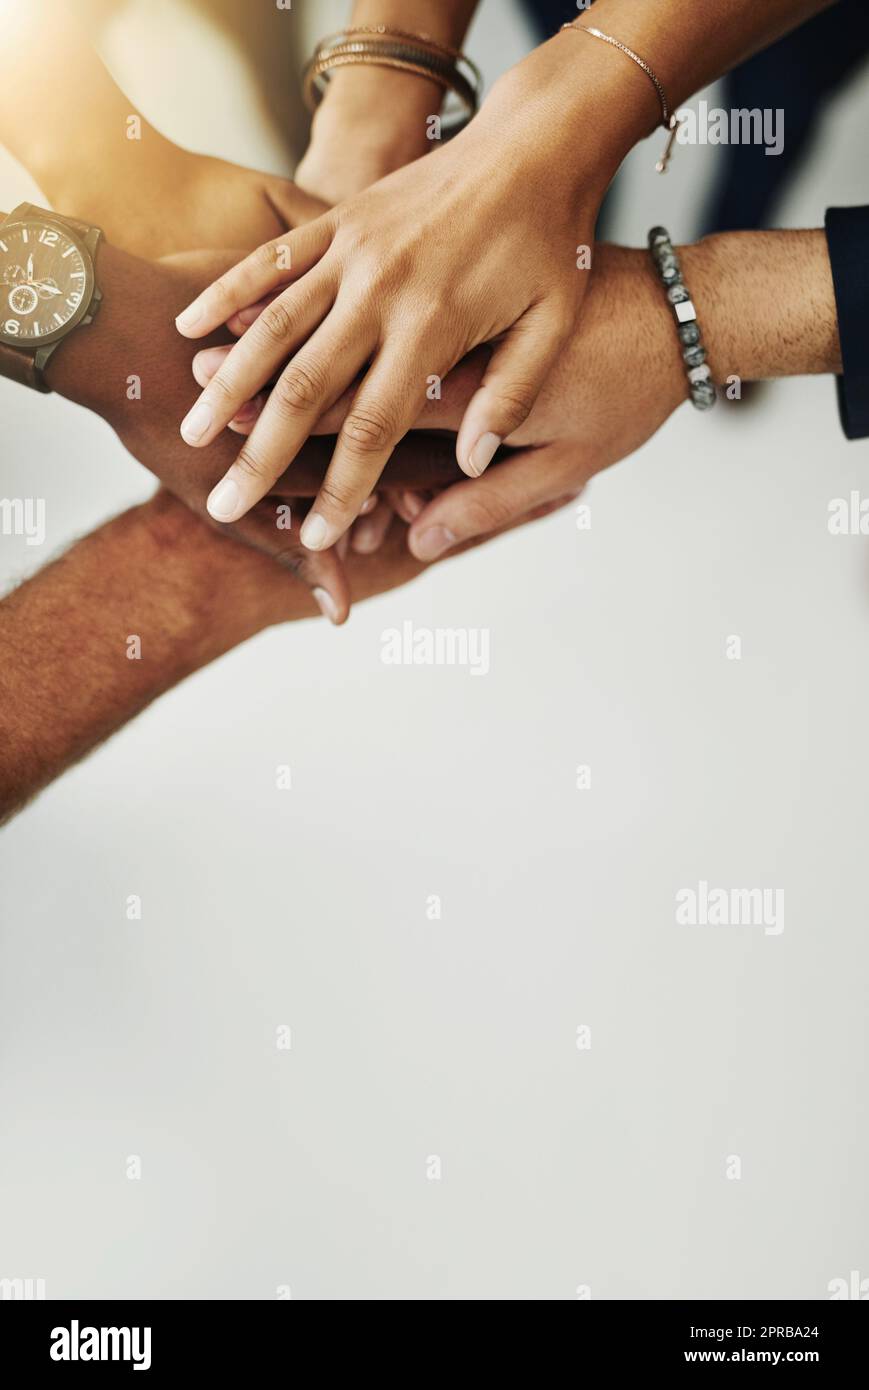 Hands in a huddle for teamwork, unity and working together from above. Closeup of a diverse group or team collaborating, joining and connected as a united people, showing solidarity and cooperation Stock Photo